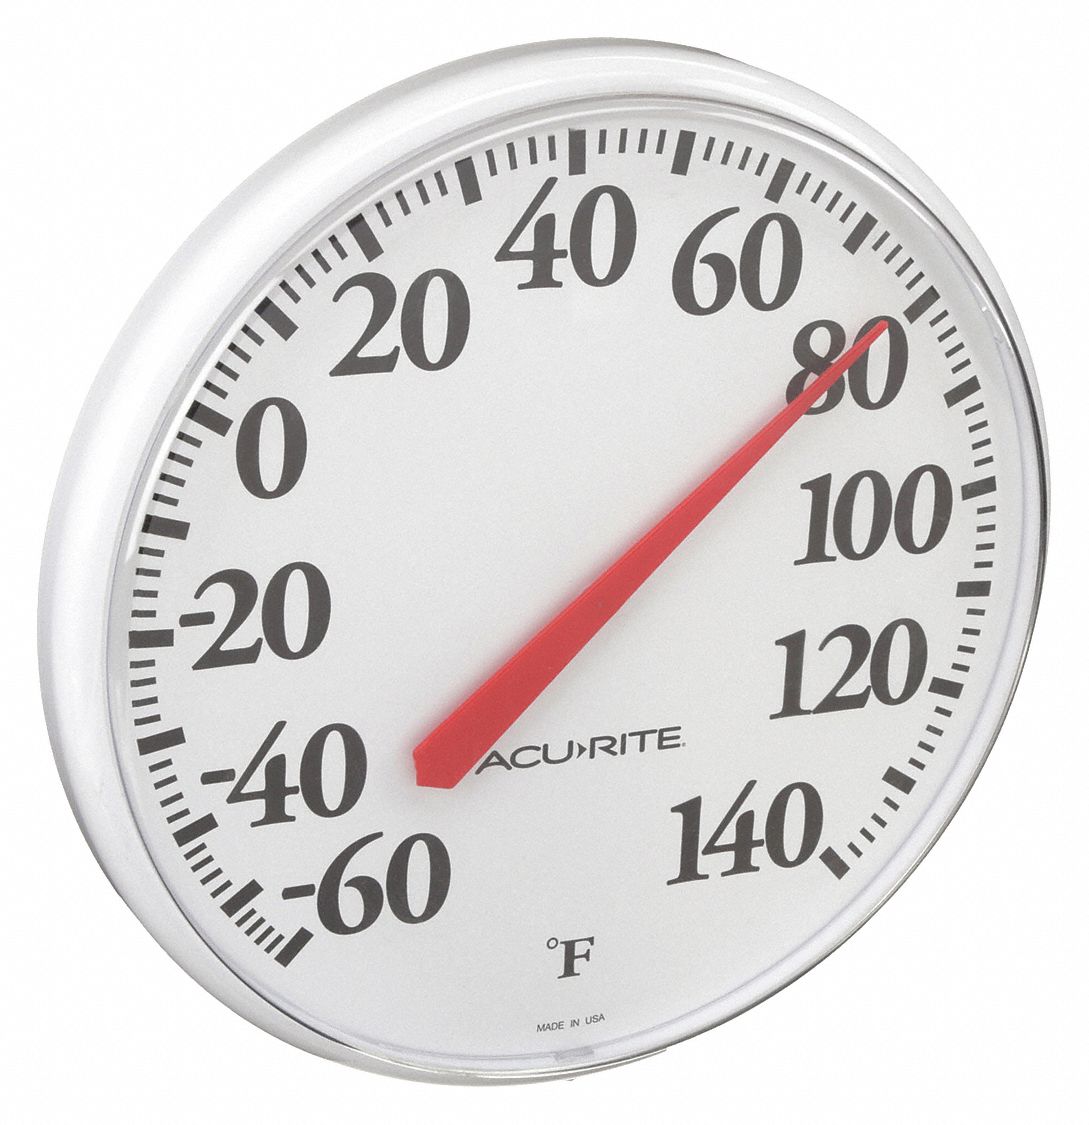 GrowBright Indoor/Outdoor Thermometer